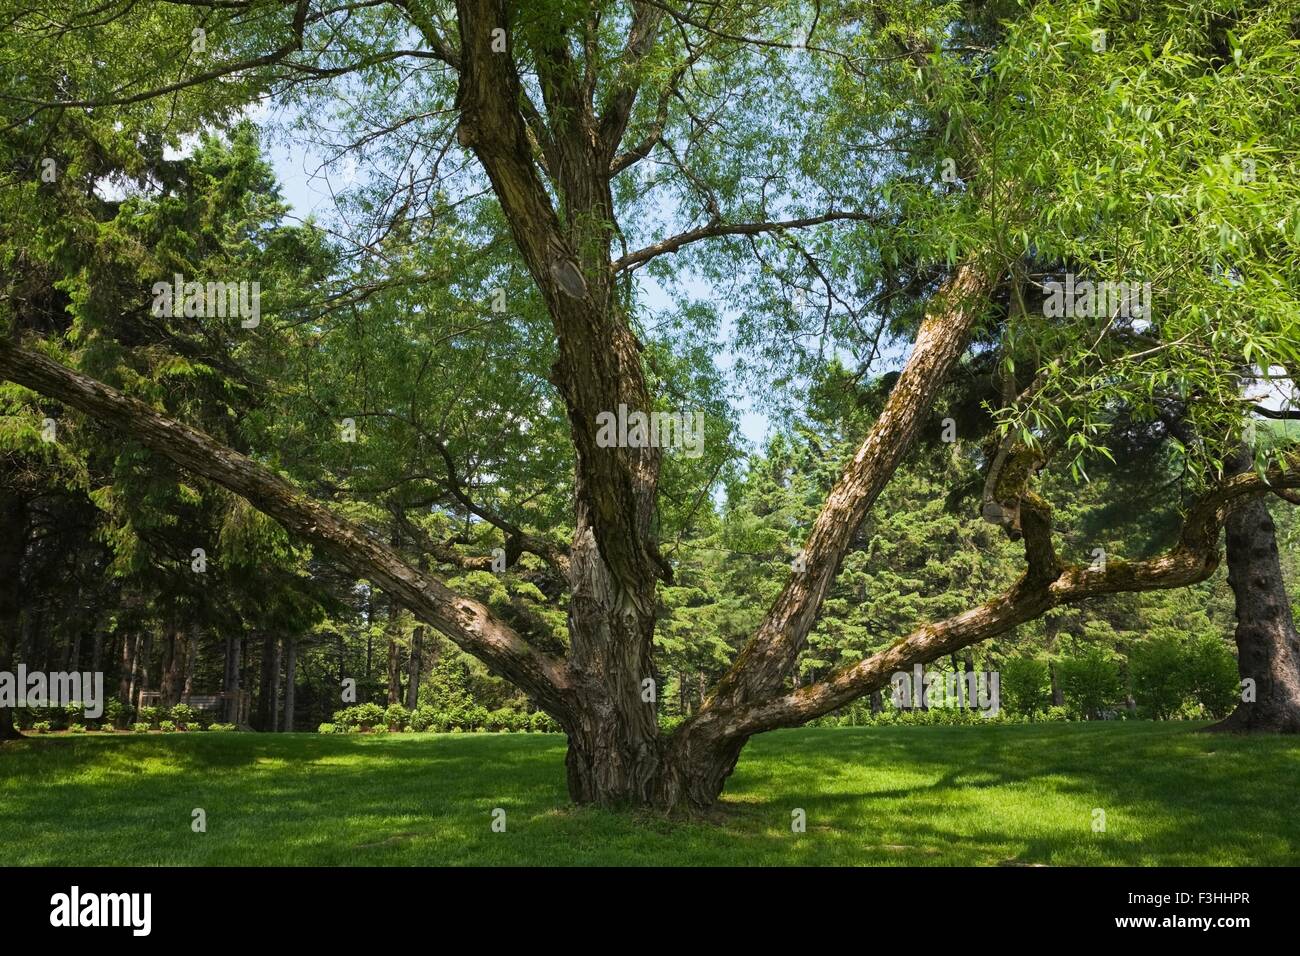 Large old pruned willow tree (salix) in backyard country garden in spring season Stock Photo